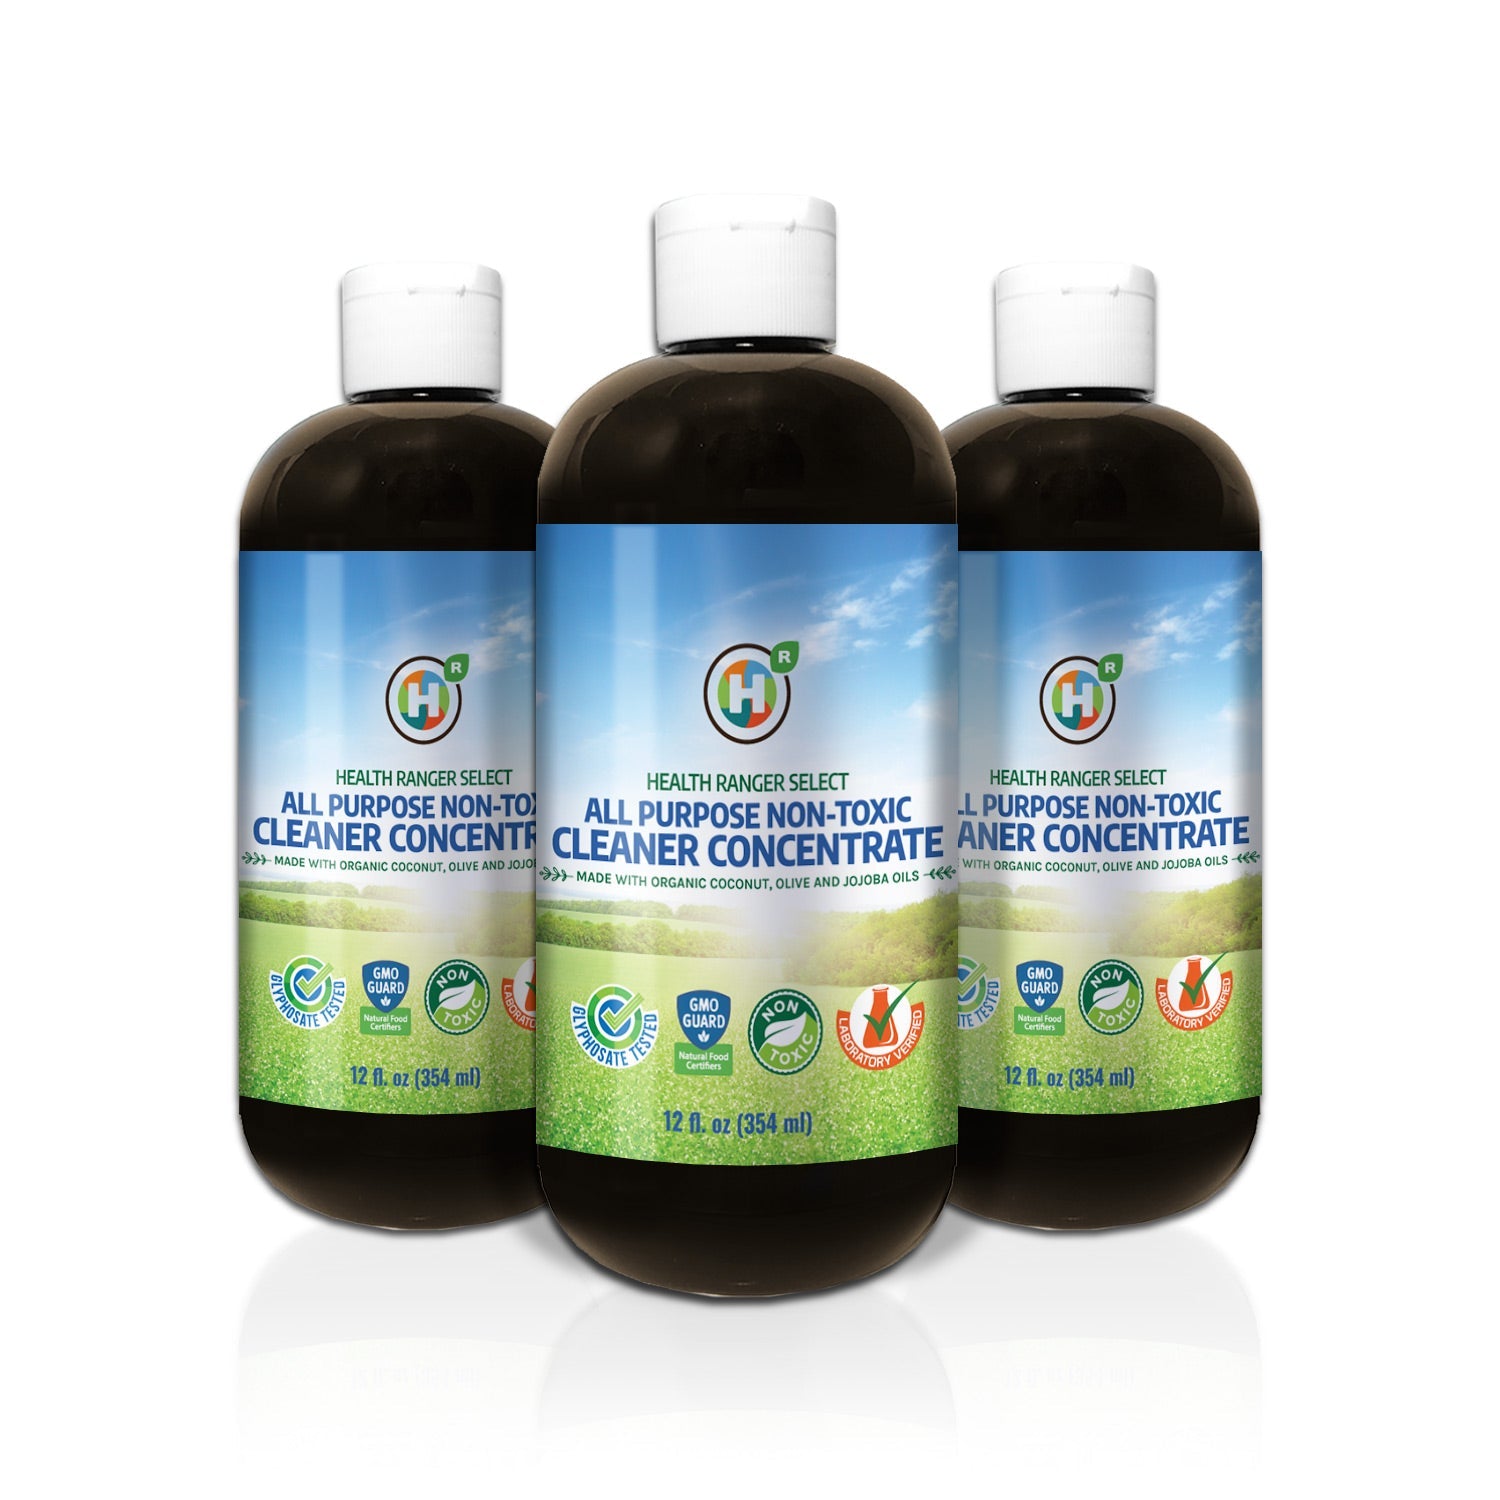 All Purpose Non-Toxic Cleaner Concentrate 12oz (354ml) (3-Pack) (Made with Organic Coconut, Olive and Jojoba Oils)